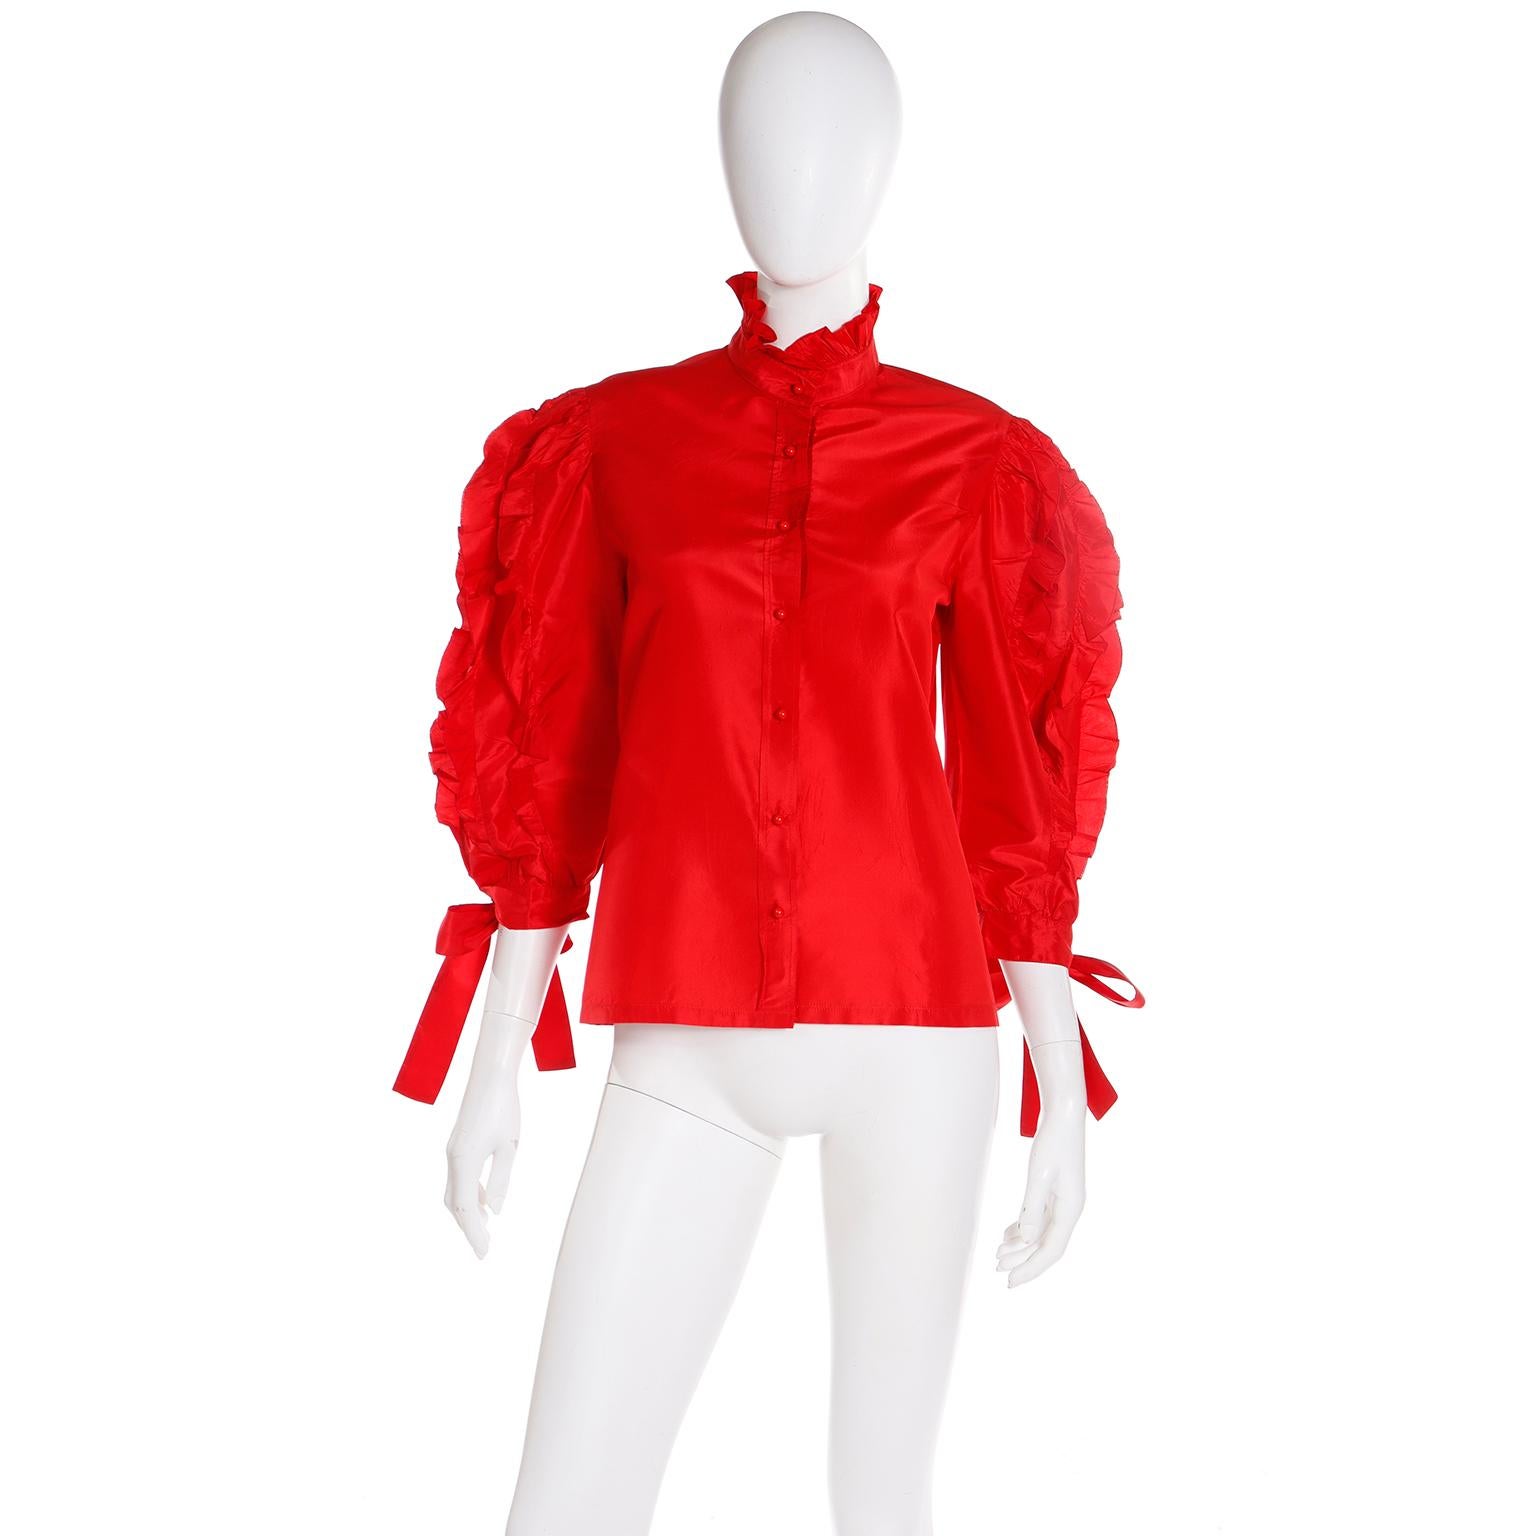 This vintage 1980's Louis Feraud Blouse is in a gorgeous red silk satin and features pretty ruffles and ties. This top has just the right amount of drama with a ruffled collar and red ball buttons down the center front. Each sleeve has three strips